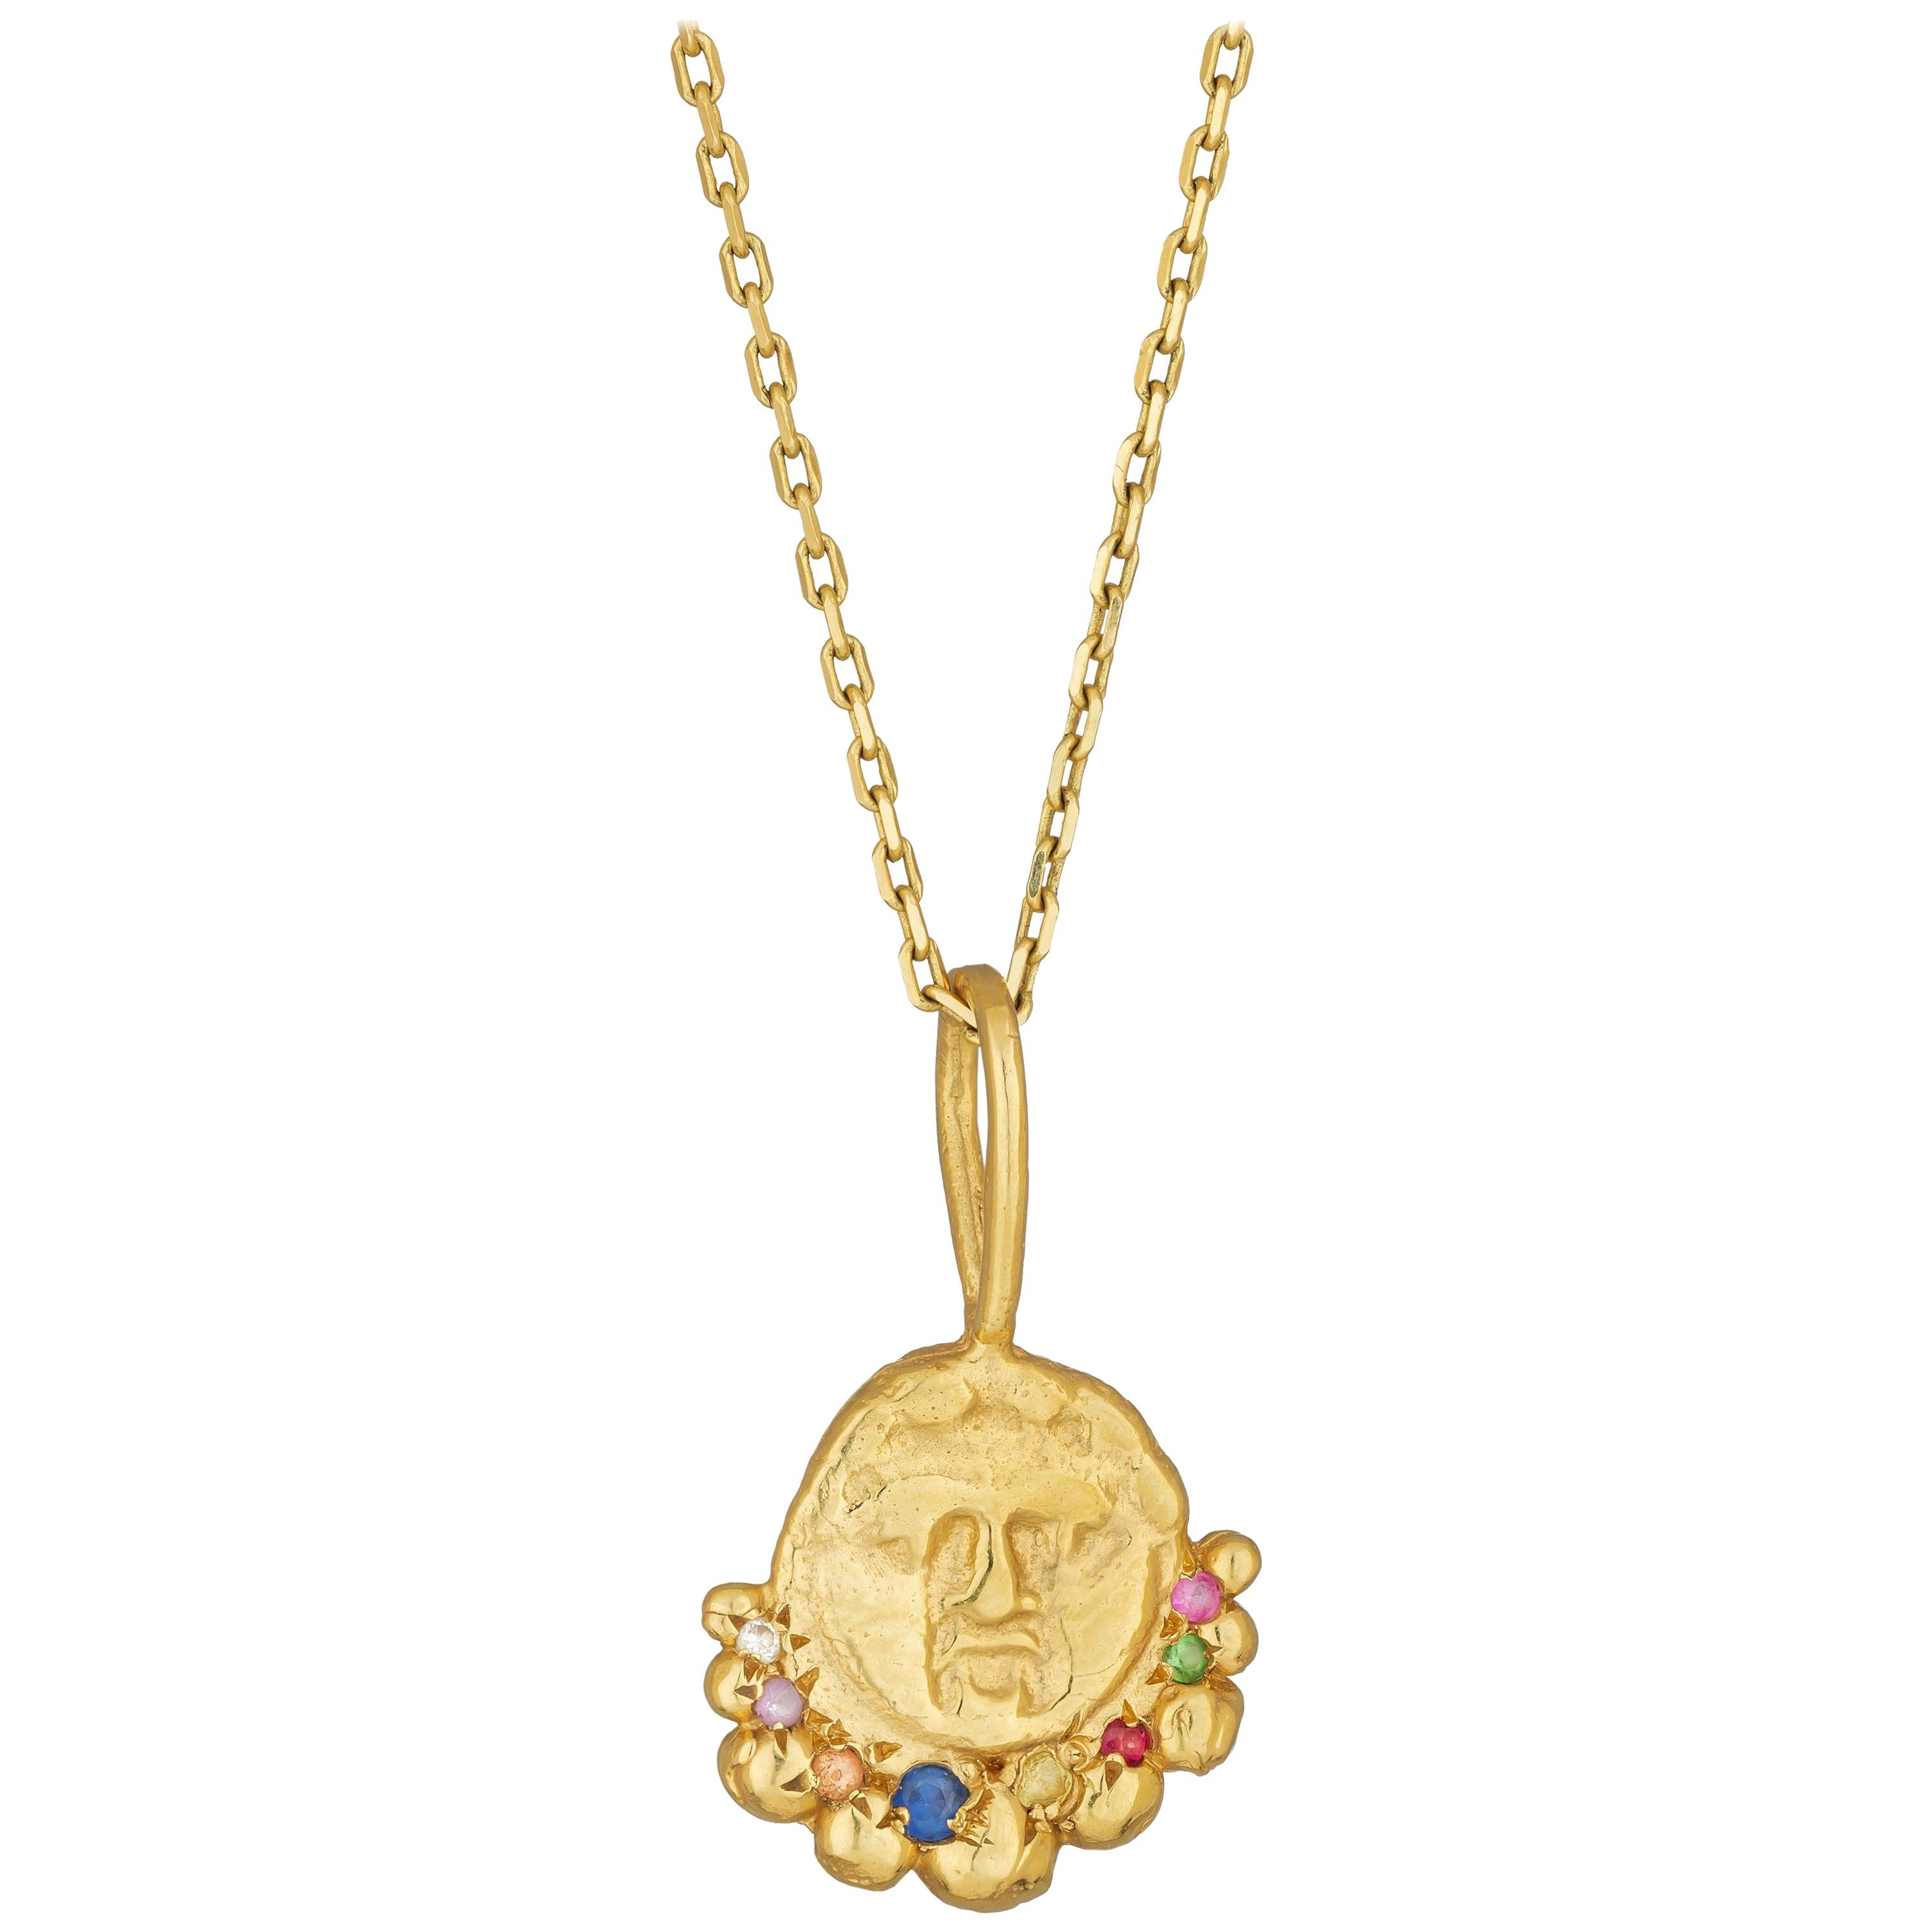 Gorgoneion Radiance Necklace, 18 Karat Yellow Gold with Sapphire, Ruby, Diamond For Sale